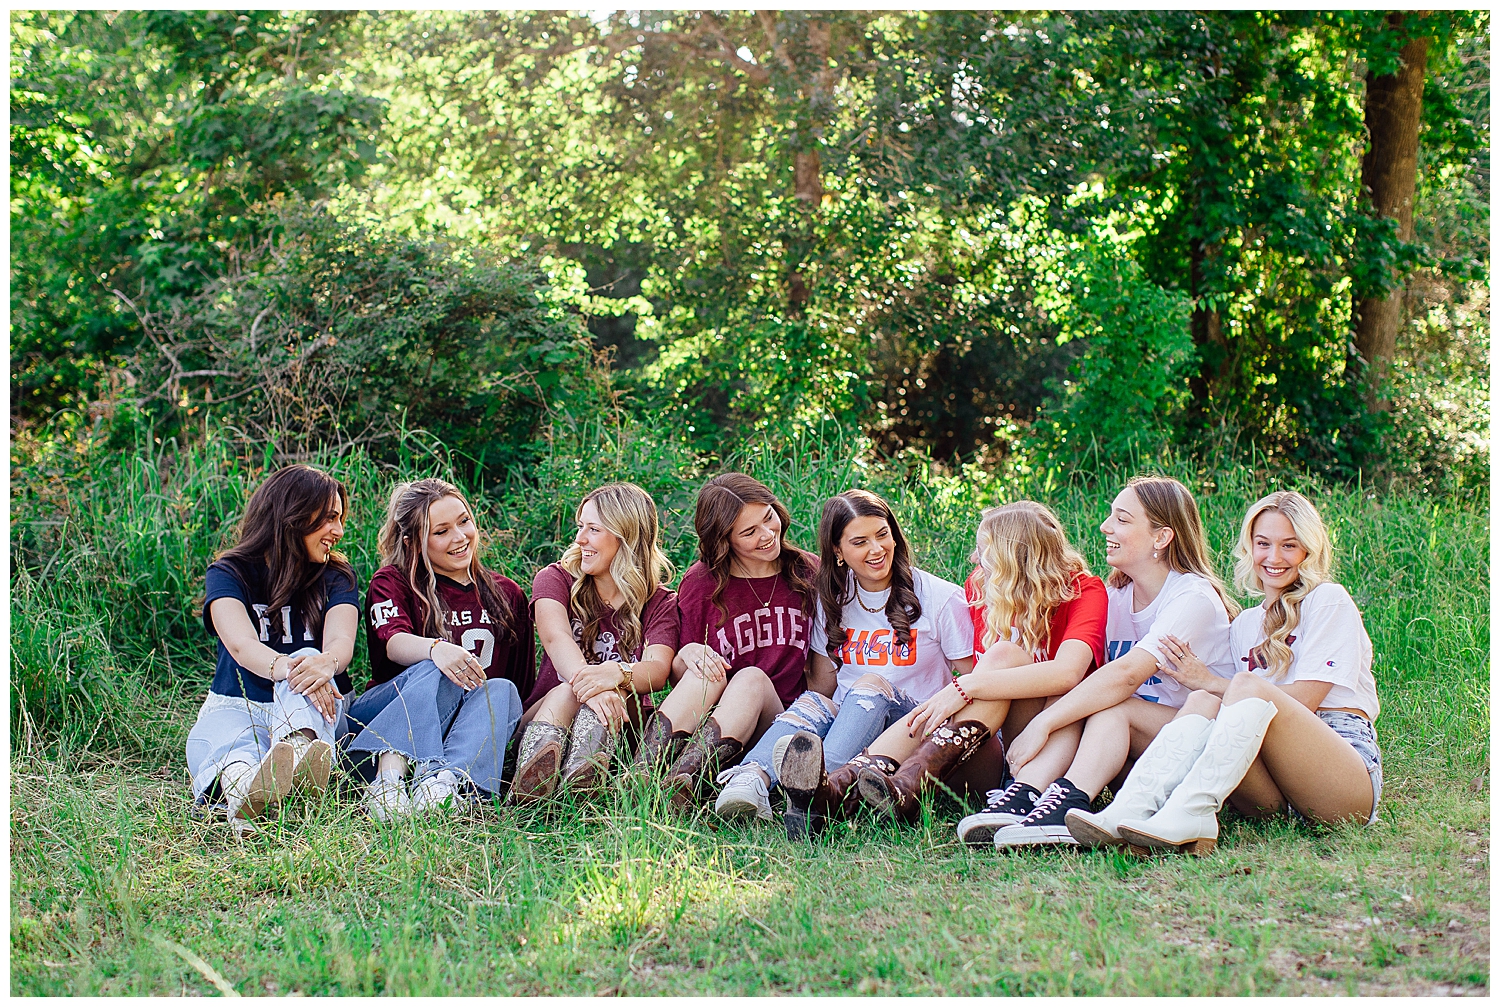 Reed Gallagher Photography senior rep team in college shirts sitting under a tree